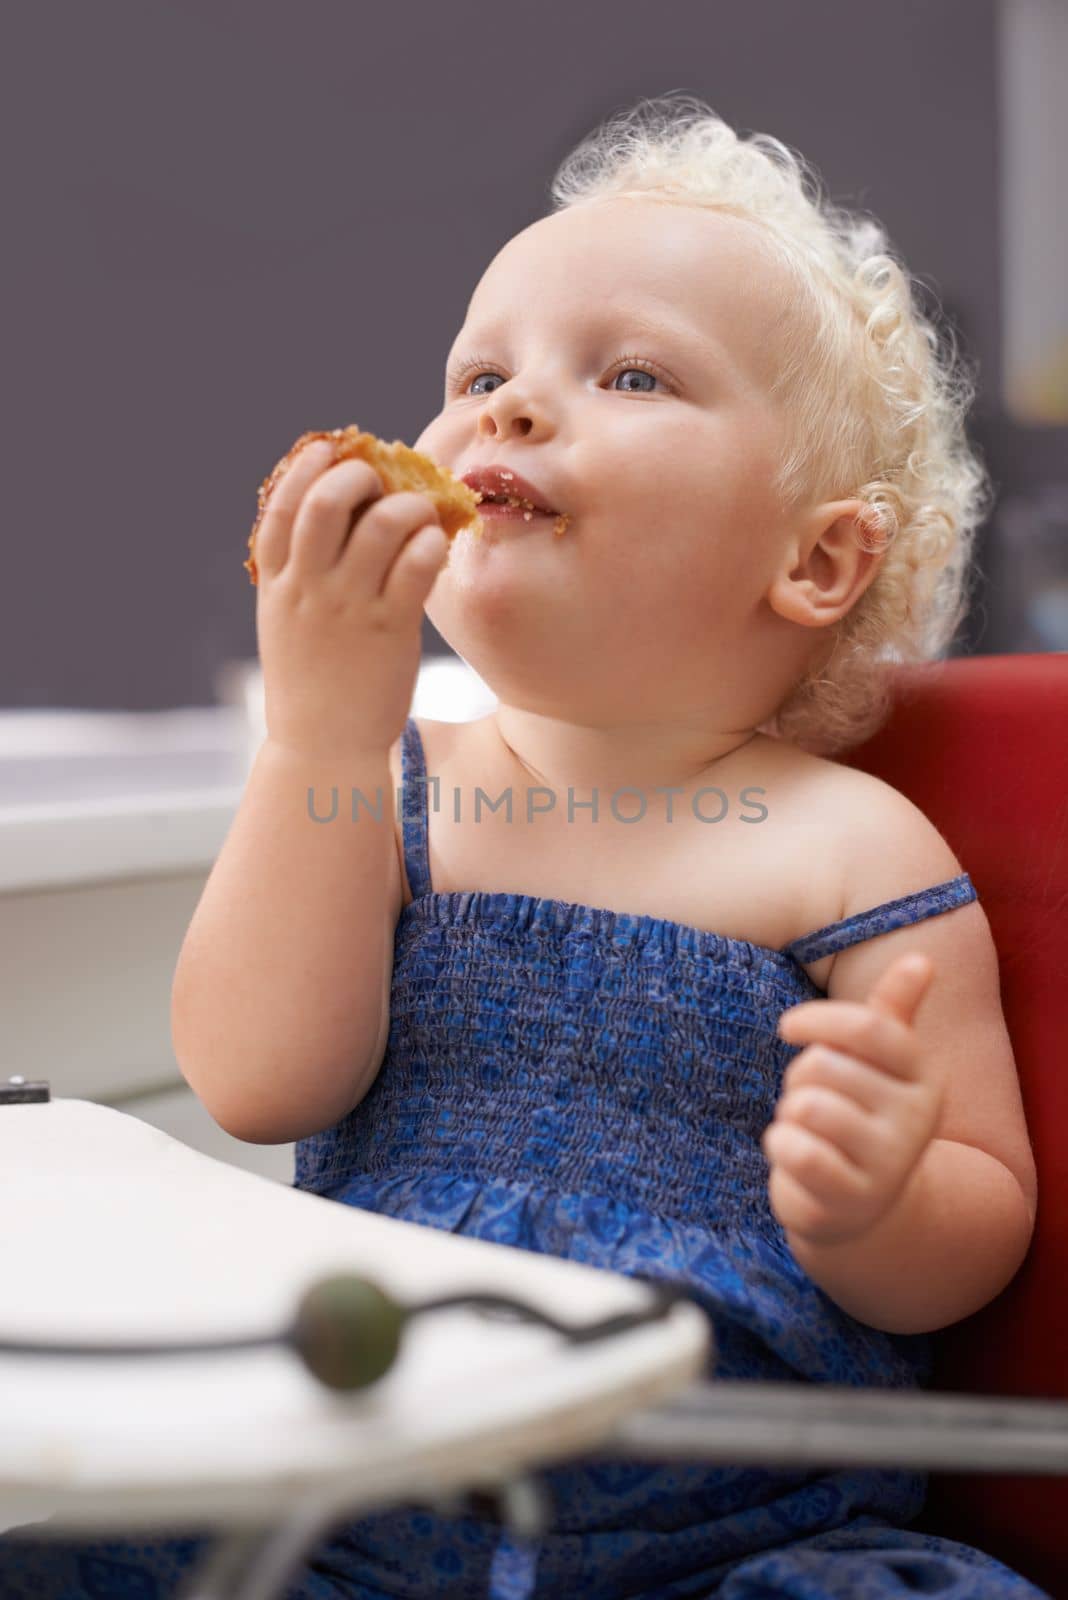 BAby is hungry. a cute young baby sitting in a high chair eating